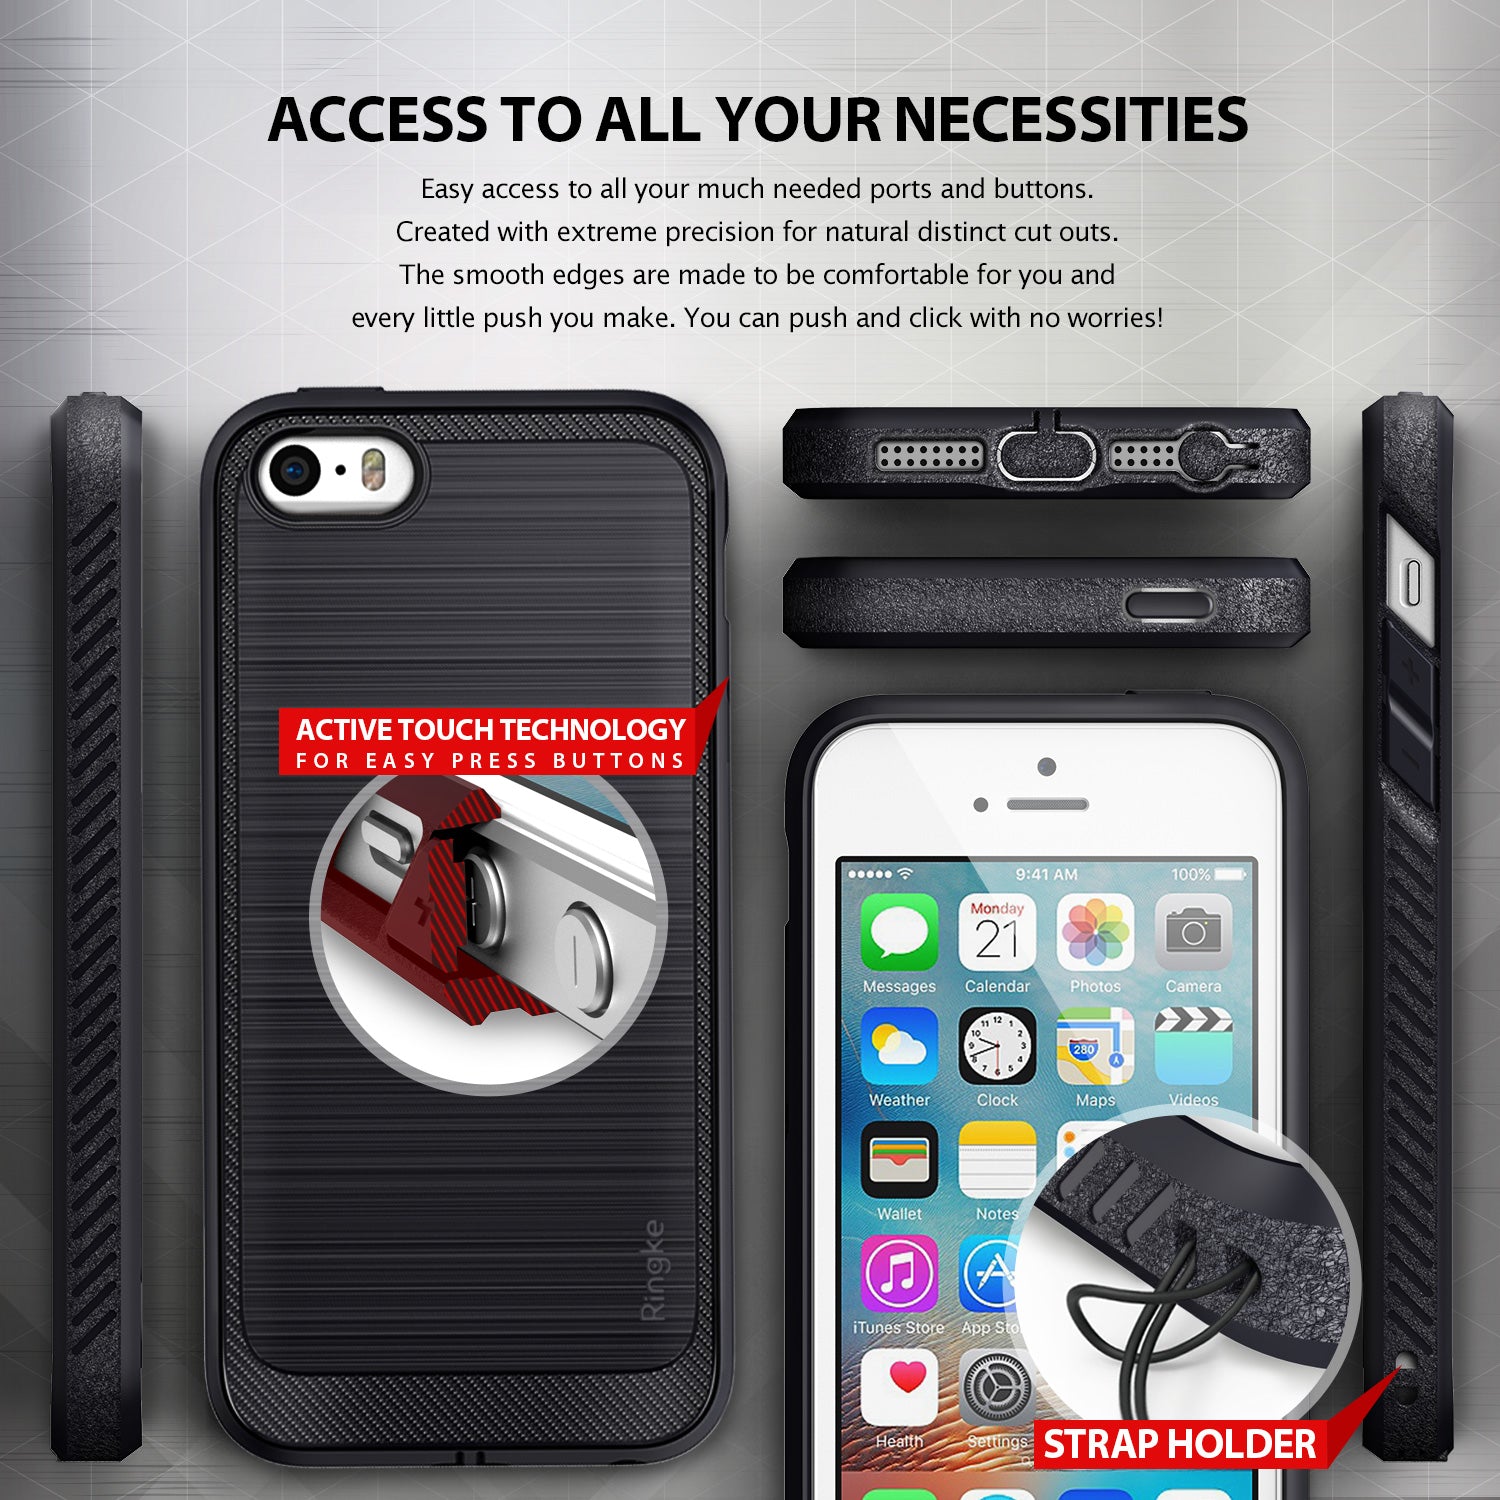 iPhone SE Case | Onyx - Access to all your necessities